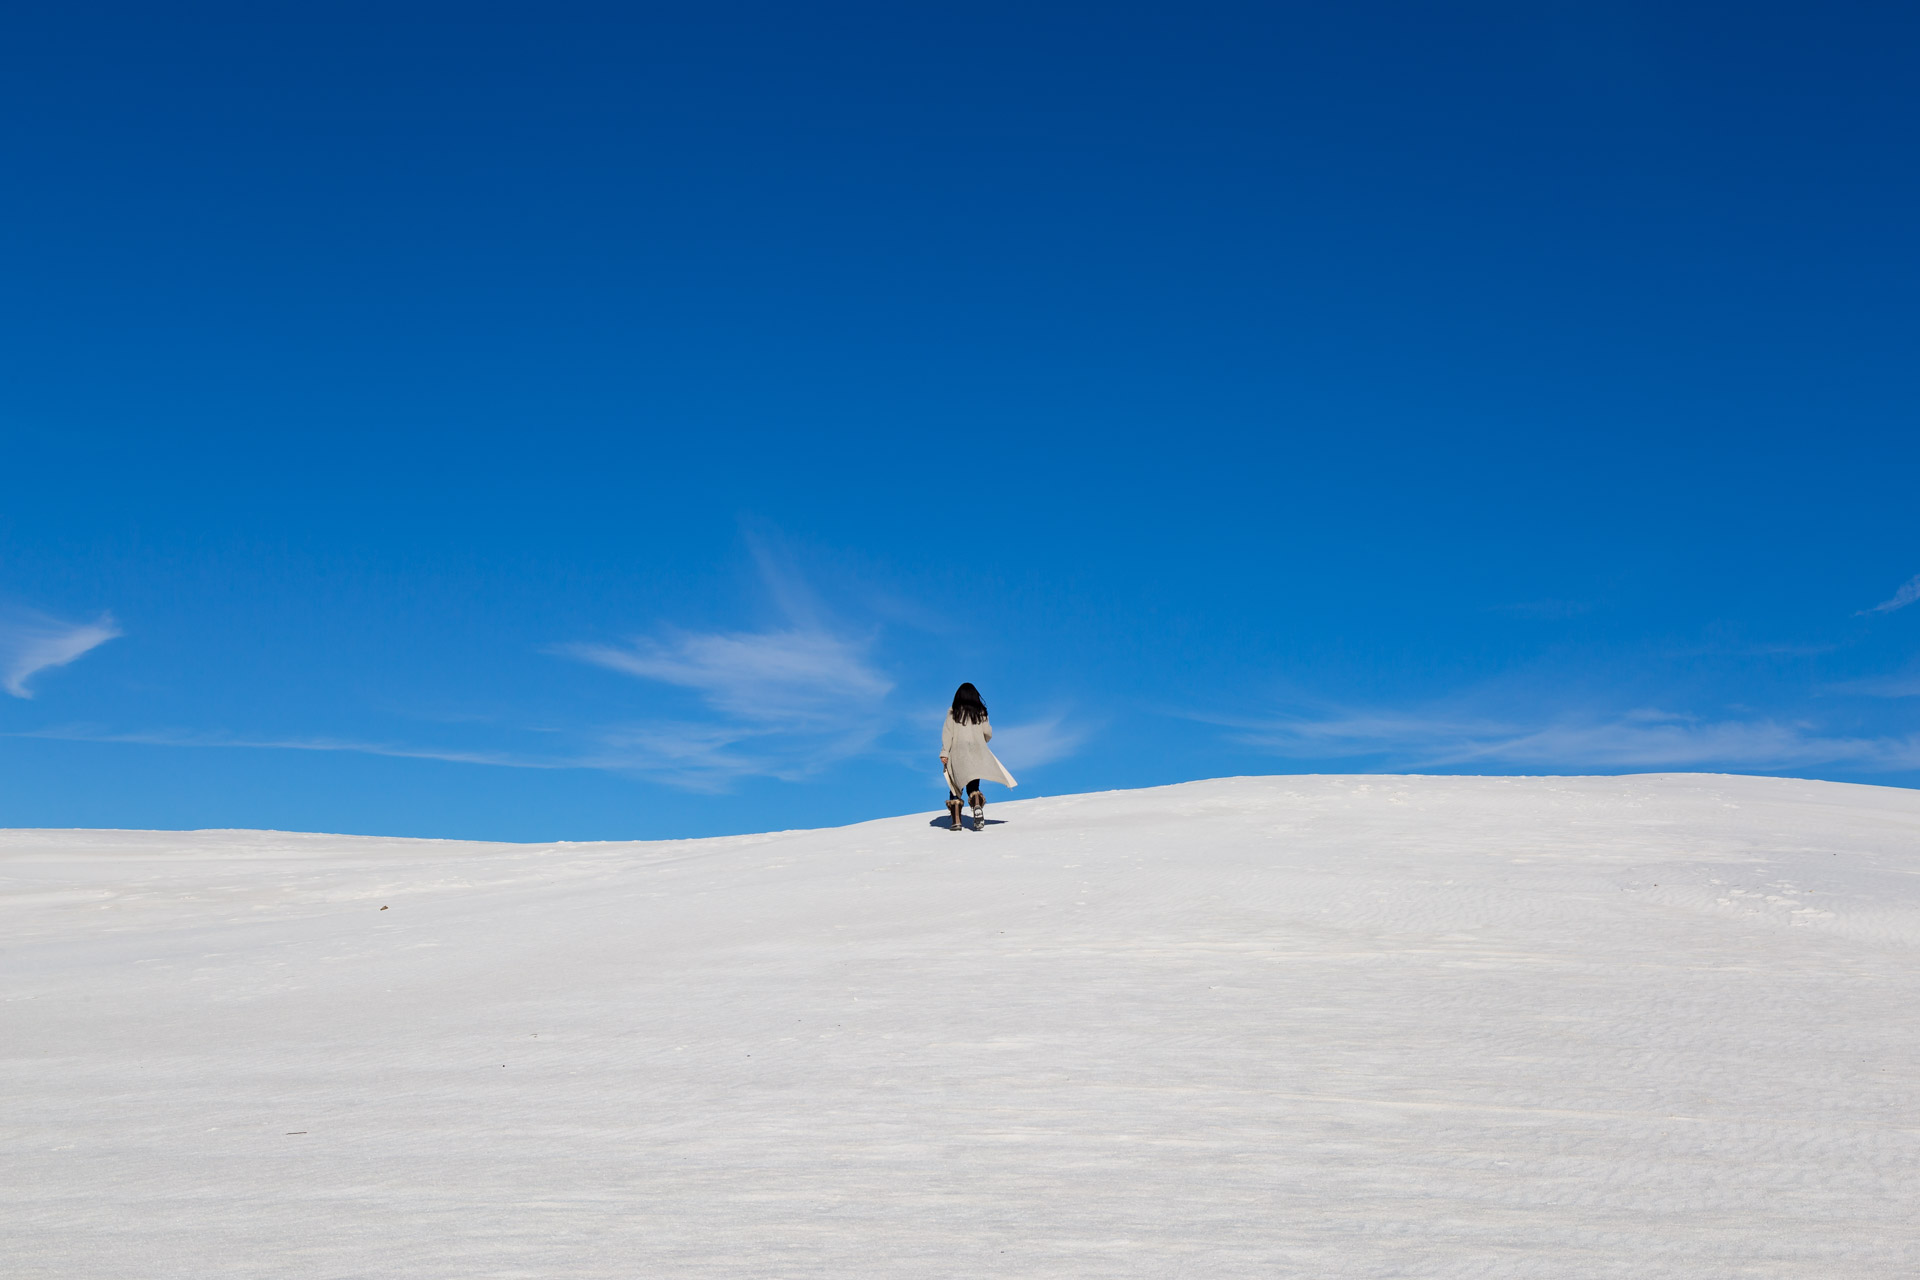 Walking On The Moon...aka White Sands National Monument